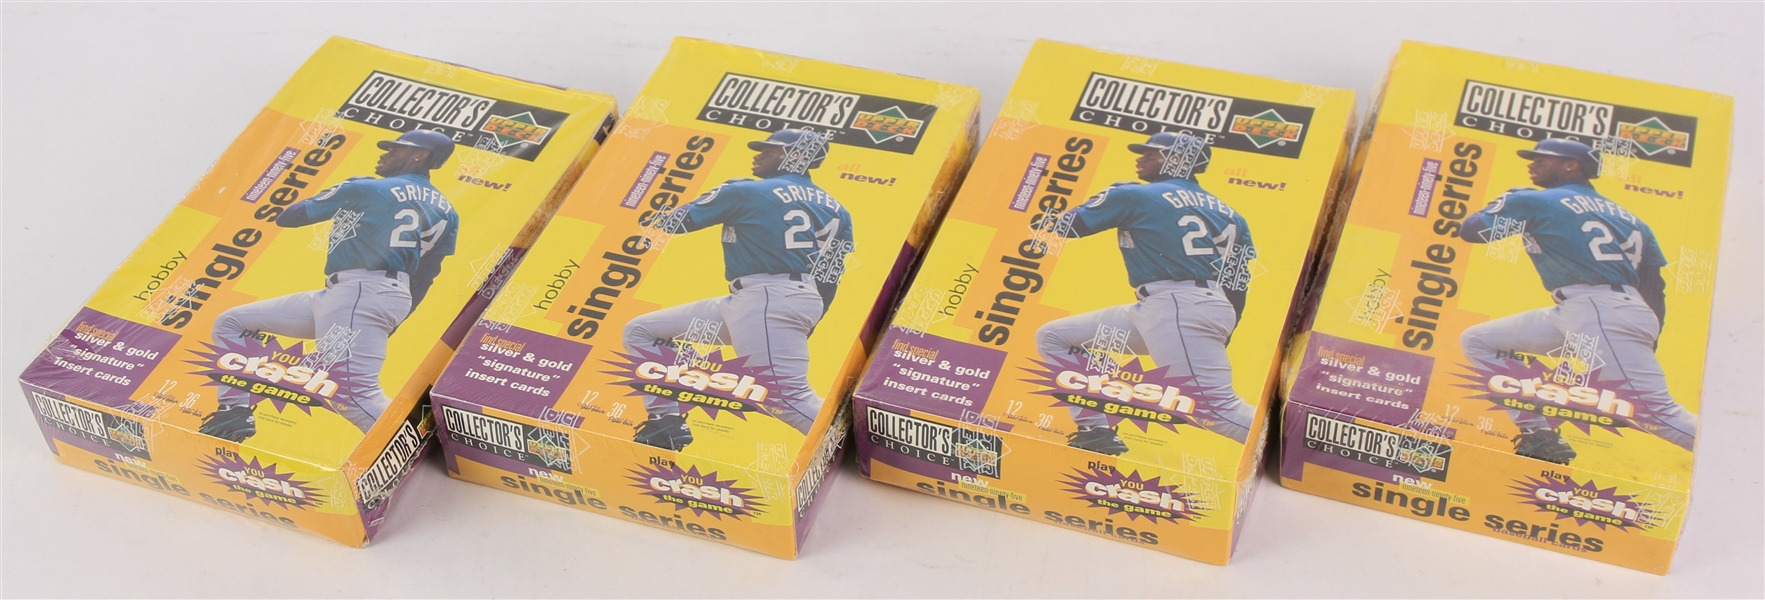 1995 Upper Deck Collectors Choice Baseball Trading Cards Unopened Hobby Boxes w/ 36 Packs - Lot of 4